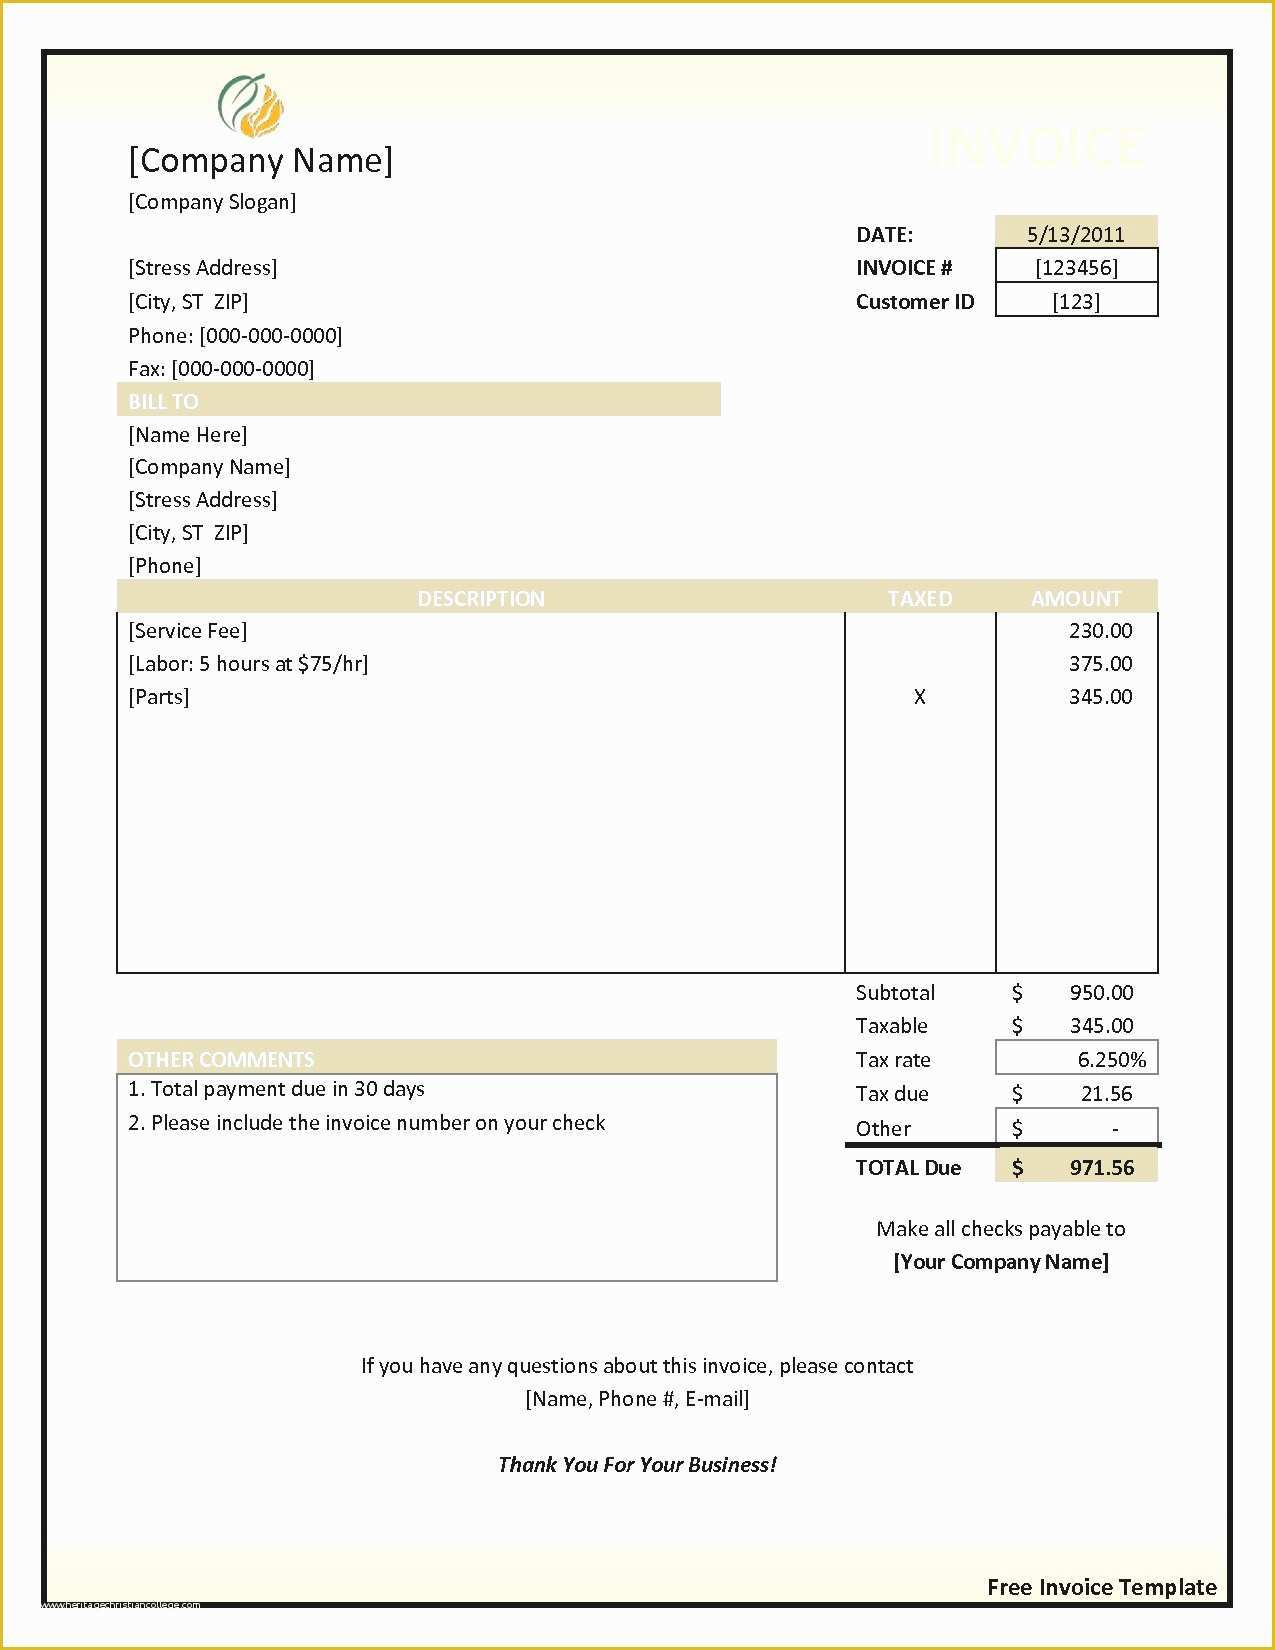 Statement Of Invoices Template Free Of Statement Invoices Template Free or Blank Invoices to